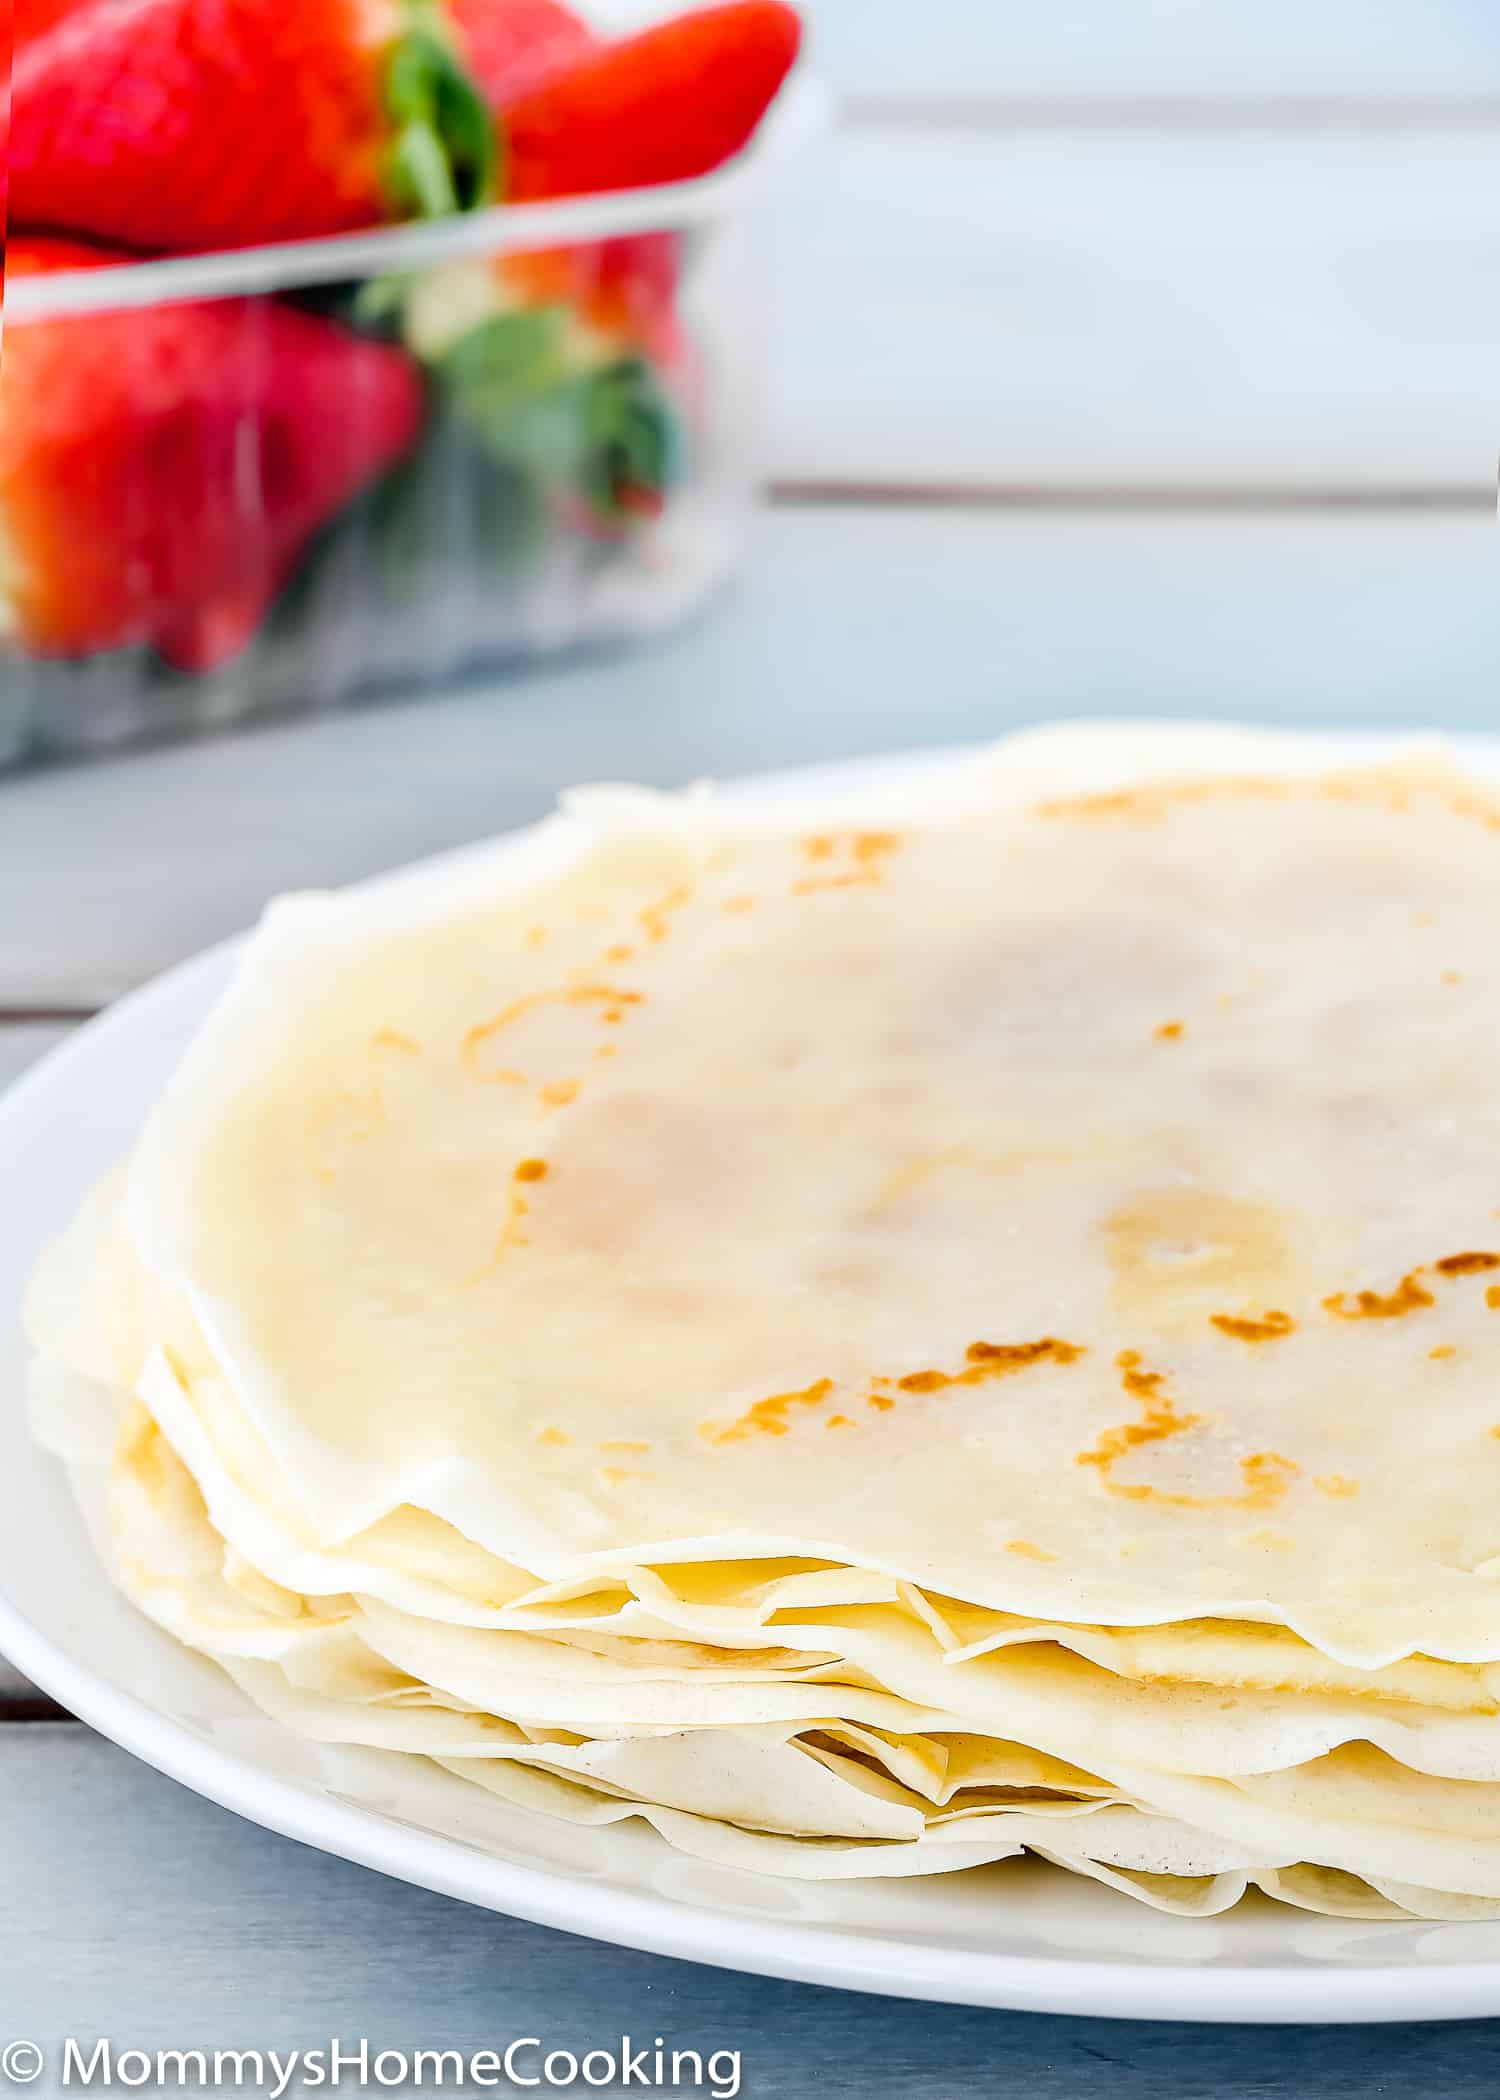 Profile view of a stack of crepes on a plate.